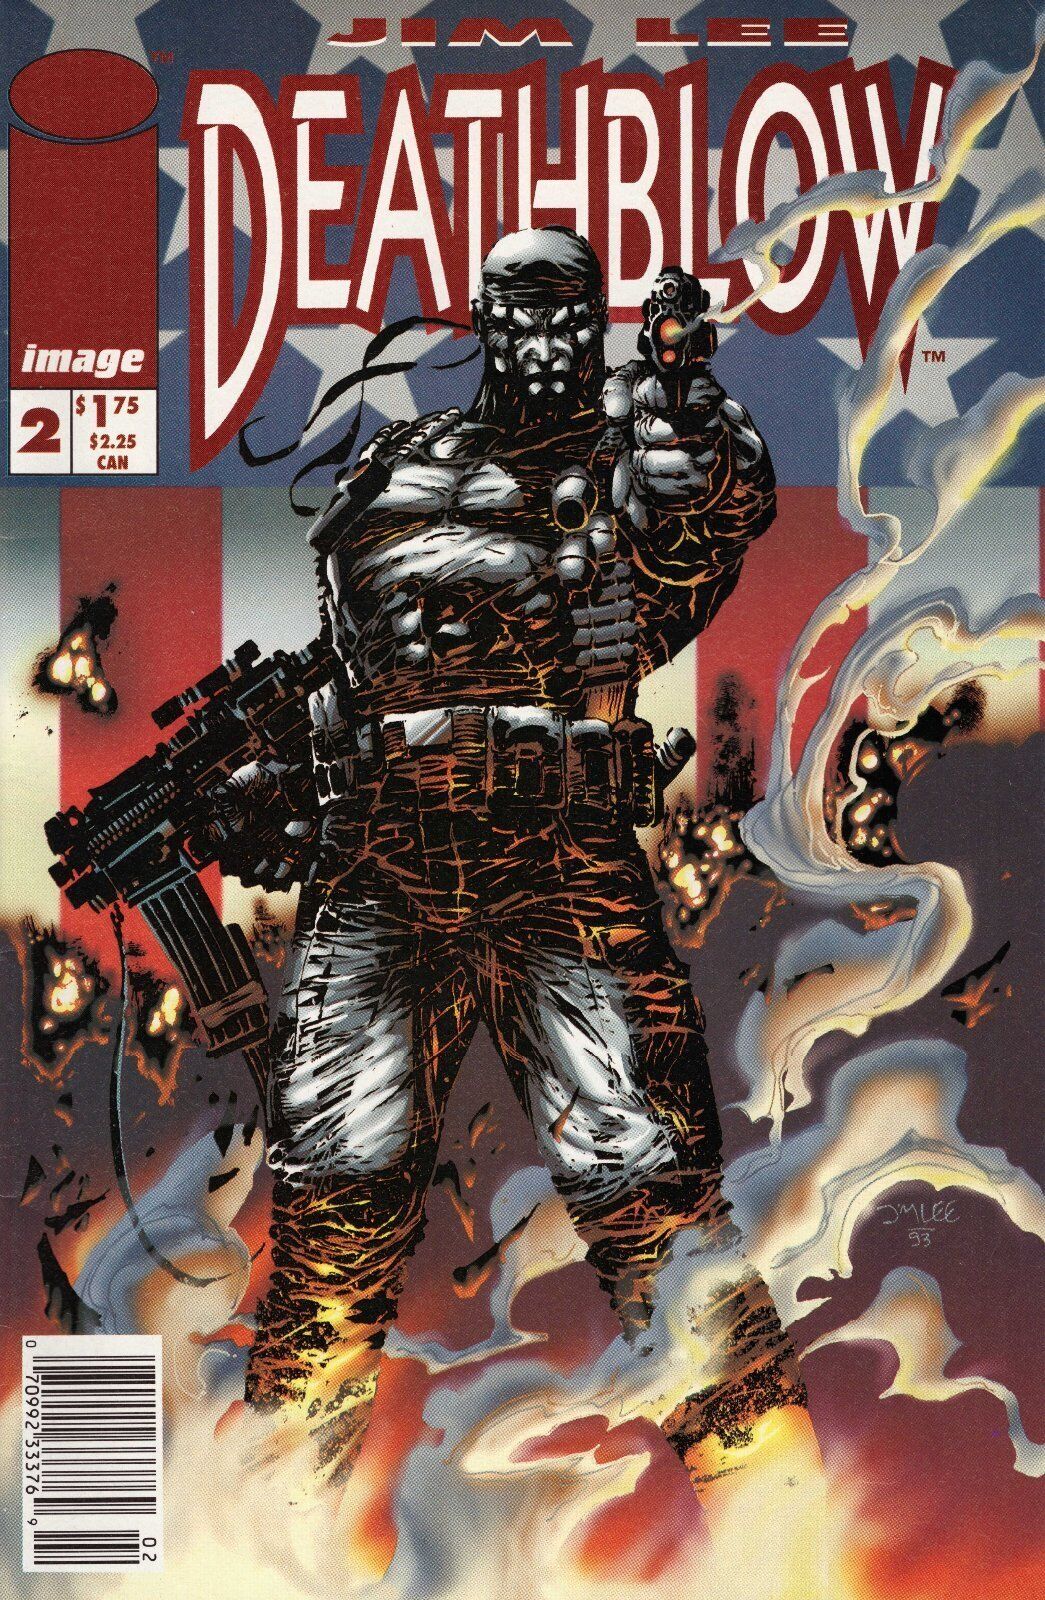 Deathblow #2 Newsstand Jim Lee Cover (1993-1996) Image